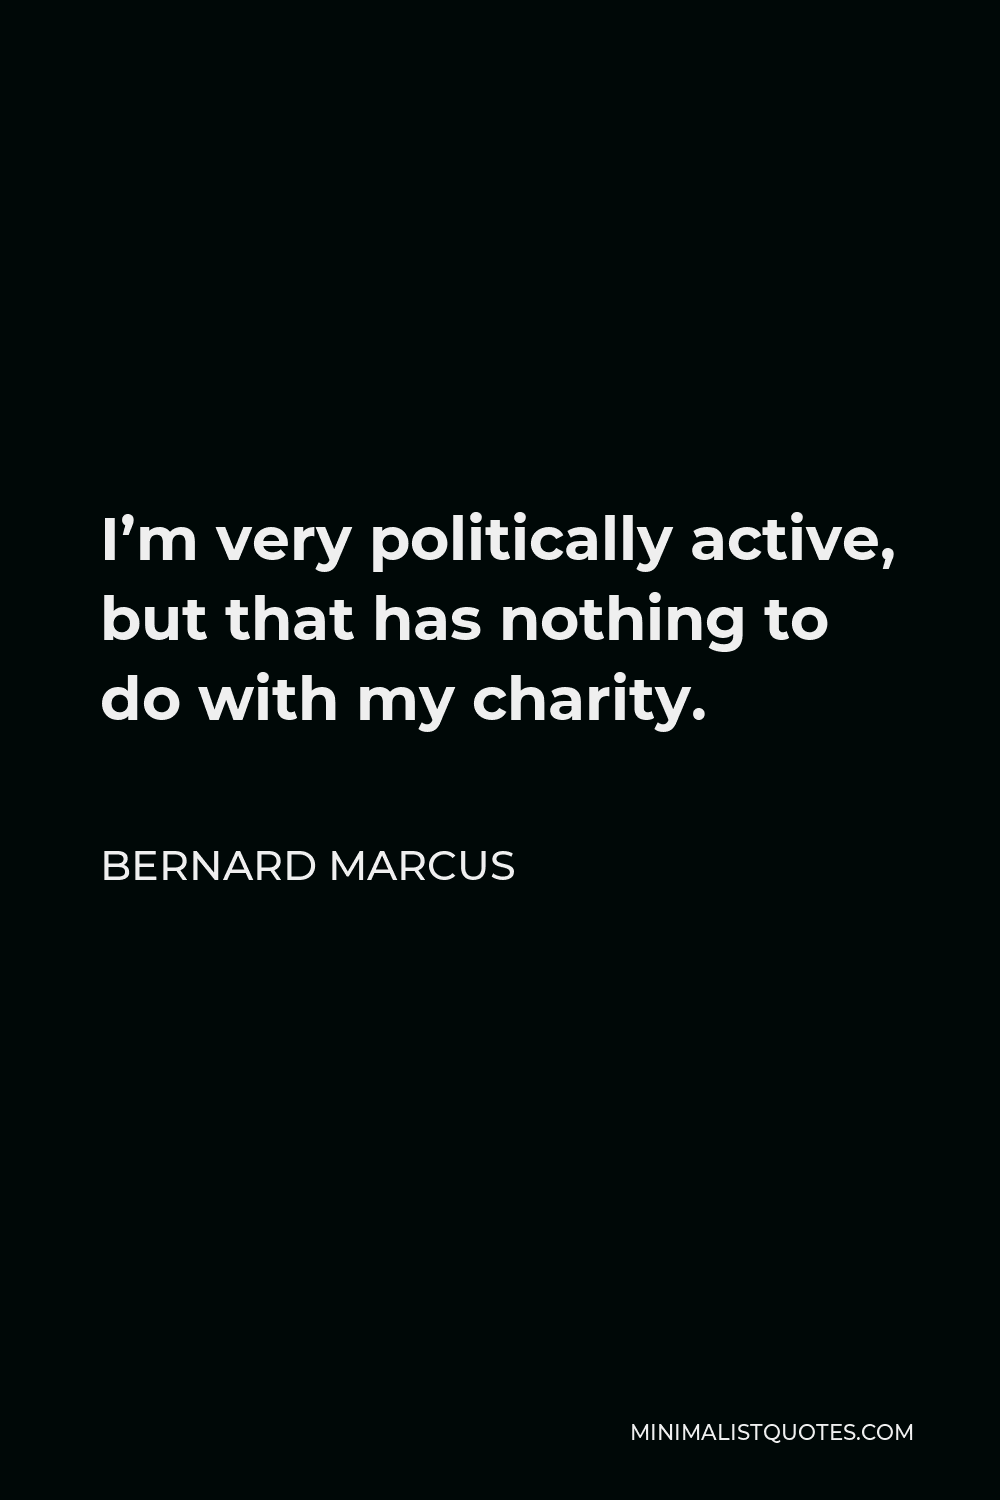 Bernard Marcus Quote - I’m very politically active, but that has nothing to do with my charity.